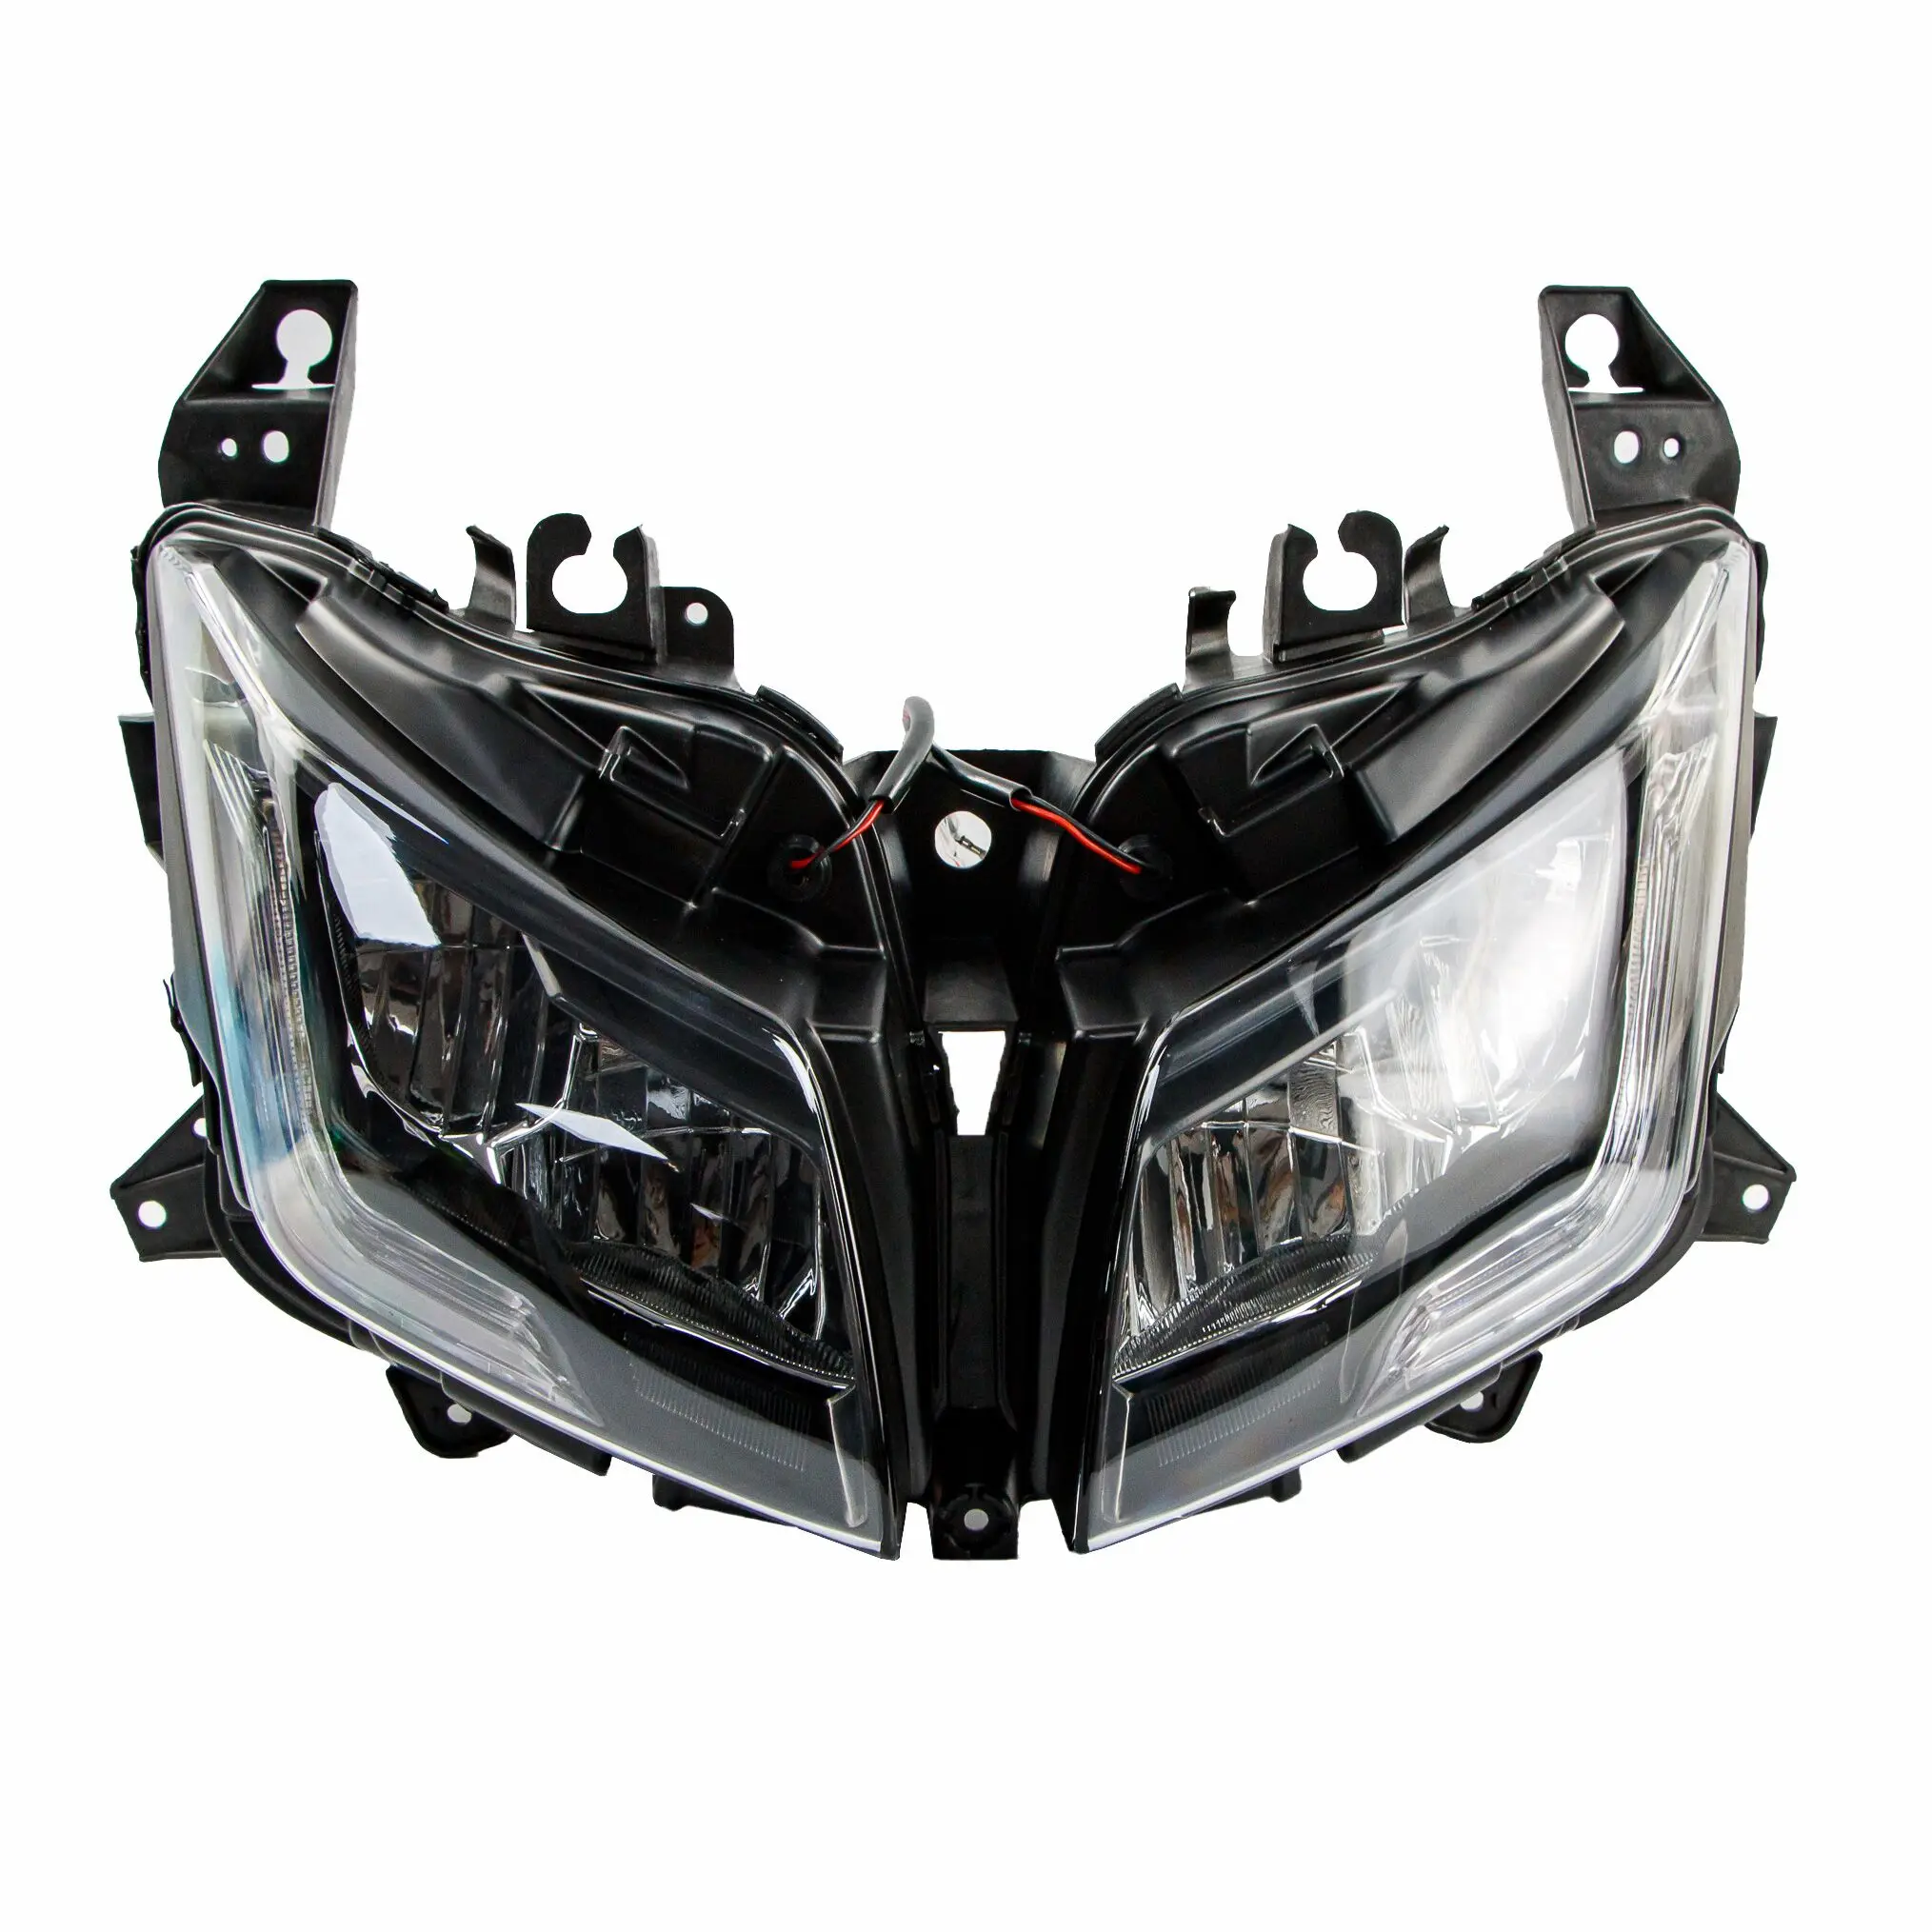 

Motorcycle Headlight Headlamp Assembly Housing Kit Front Head Light Lamp For YAMAHA T-MAX530 TMAX 530 TMAX530 2015 2016